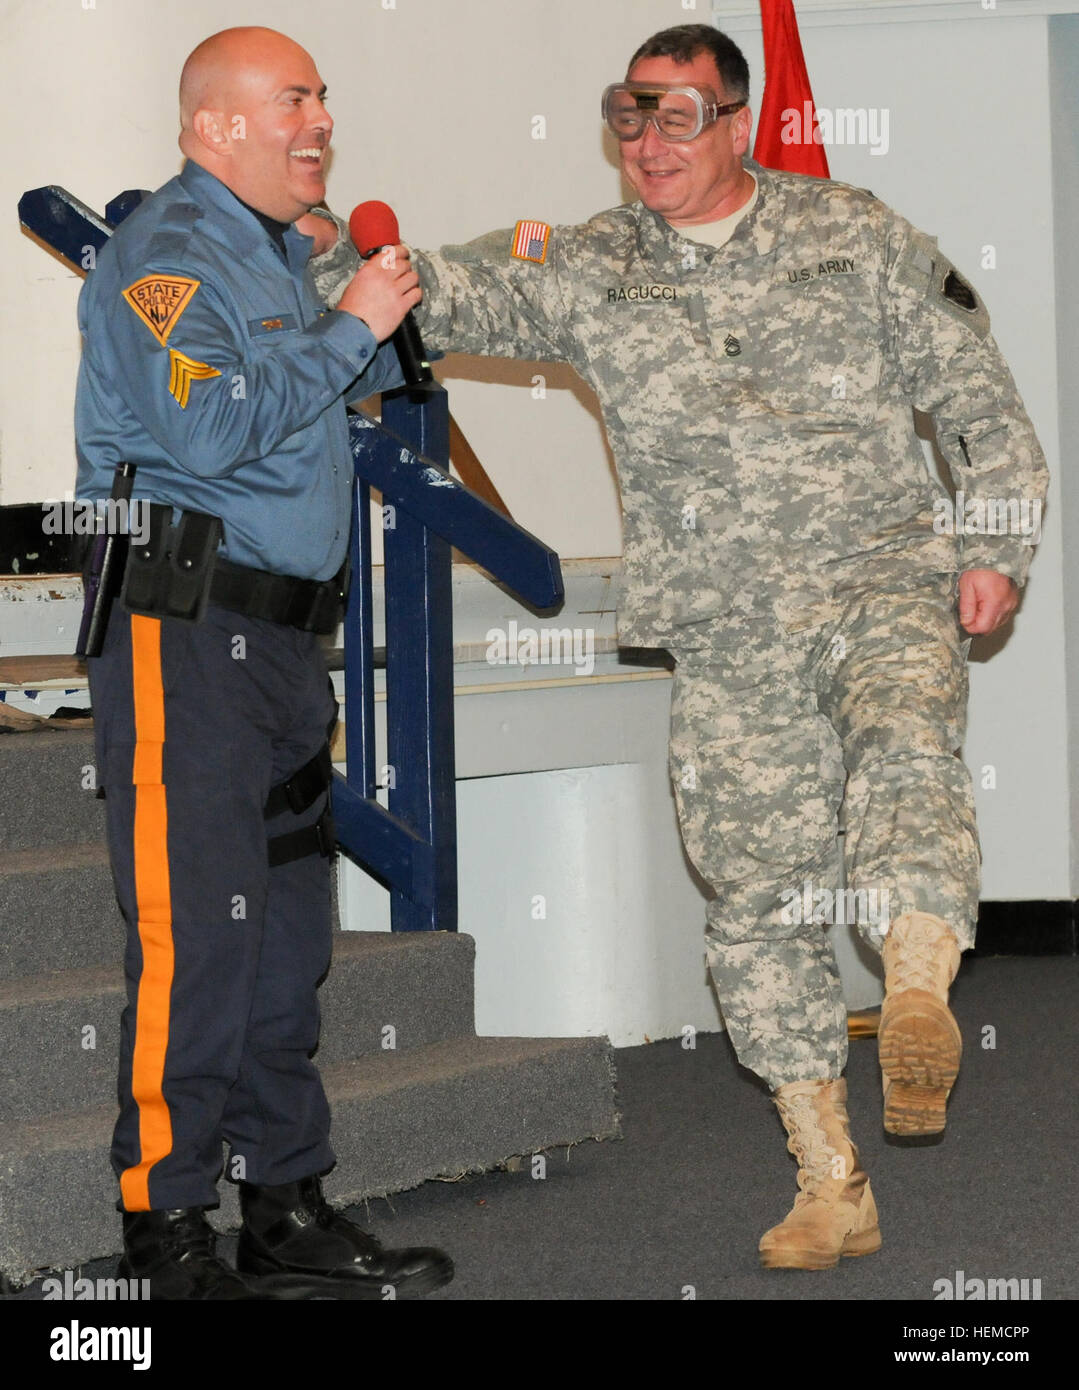 Sgt. 1st Class John Ragucci, 99th Regional Support Command, right, tries to walk a straight line for the N.J. State Police while wearing goggles that simulate being intoxicated with alcohol during a Safety Stand-Down Dec. 13 at Timmermann Conference Center on Joint Base McGuire-Dix-Lakehurst, N.J. The purpose of the event was to raise awareness regarding safety issues affecting military families and service members both on- and off-duty. Army puts safety first with Stand-Down event 121216-A-VX676-001 Stock Photo